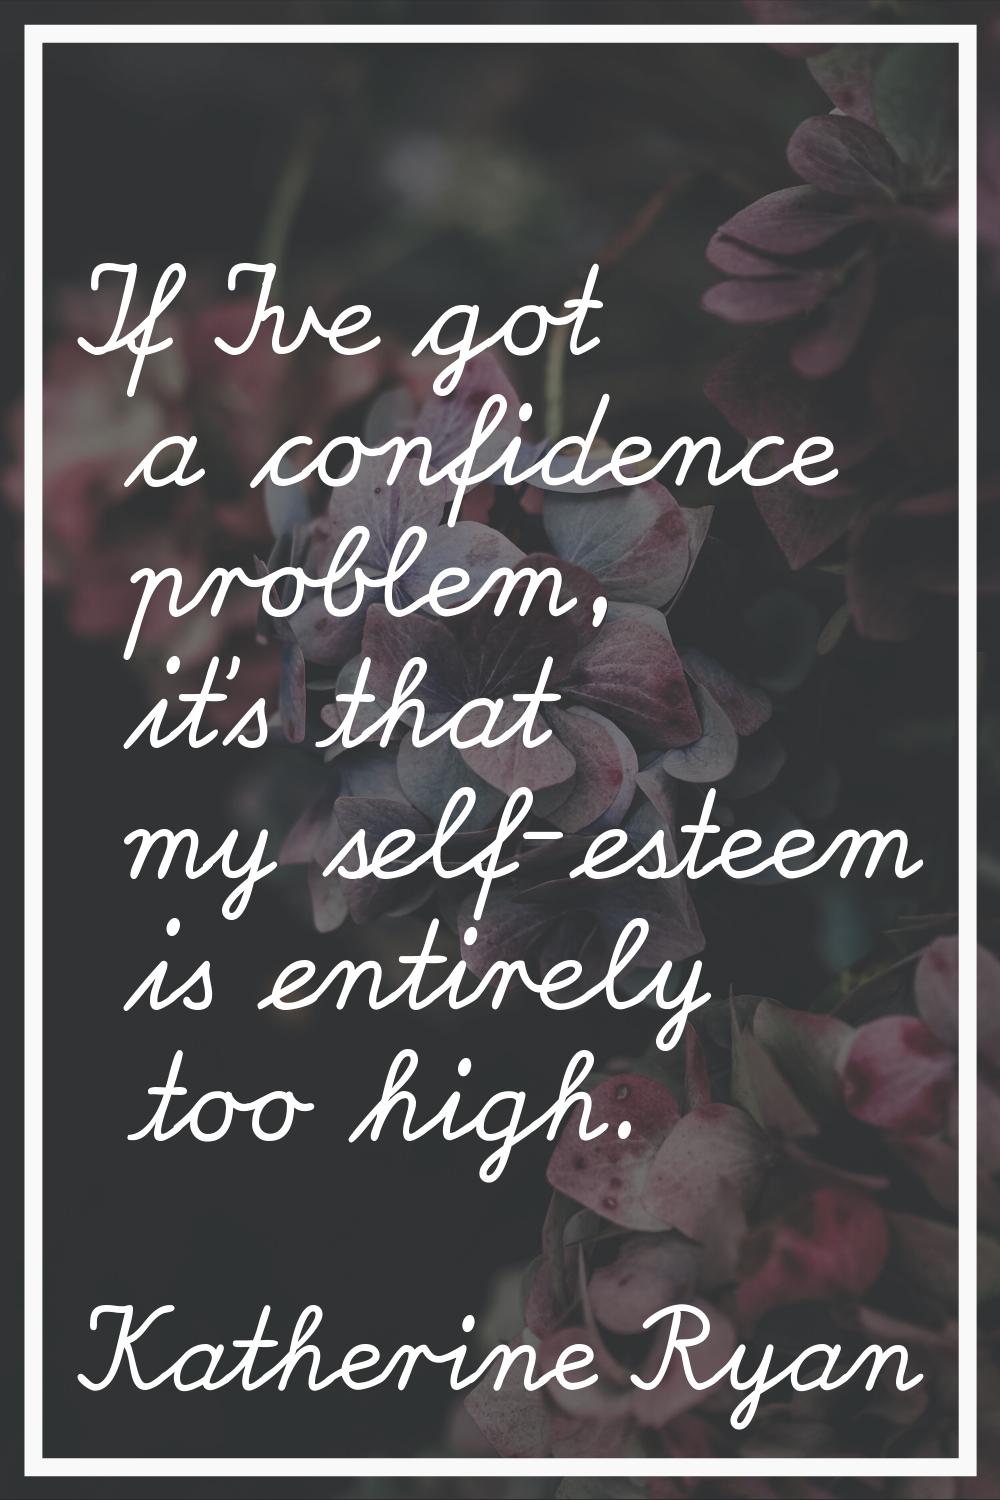 If I've got a confidence problem, it's that my self-esteem is entirely too high.